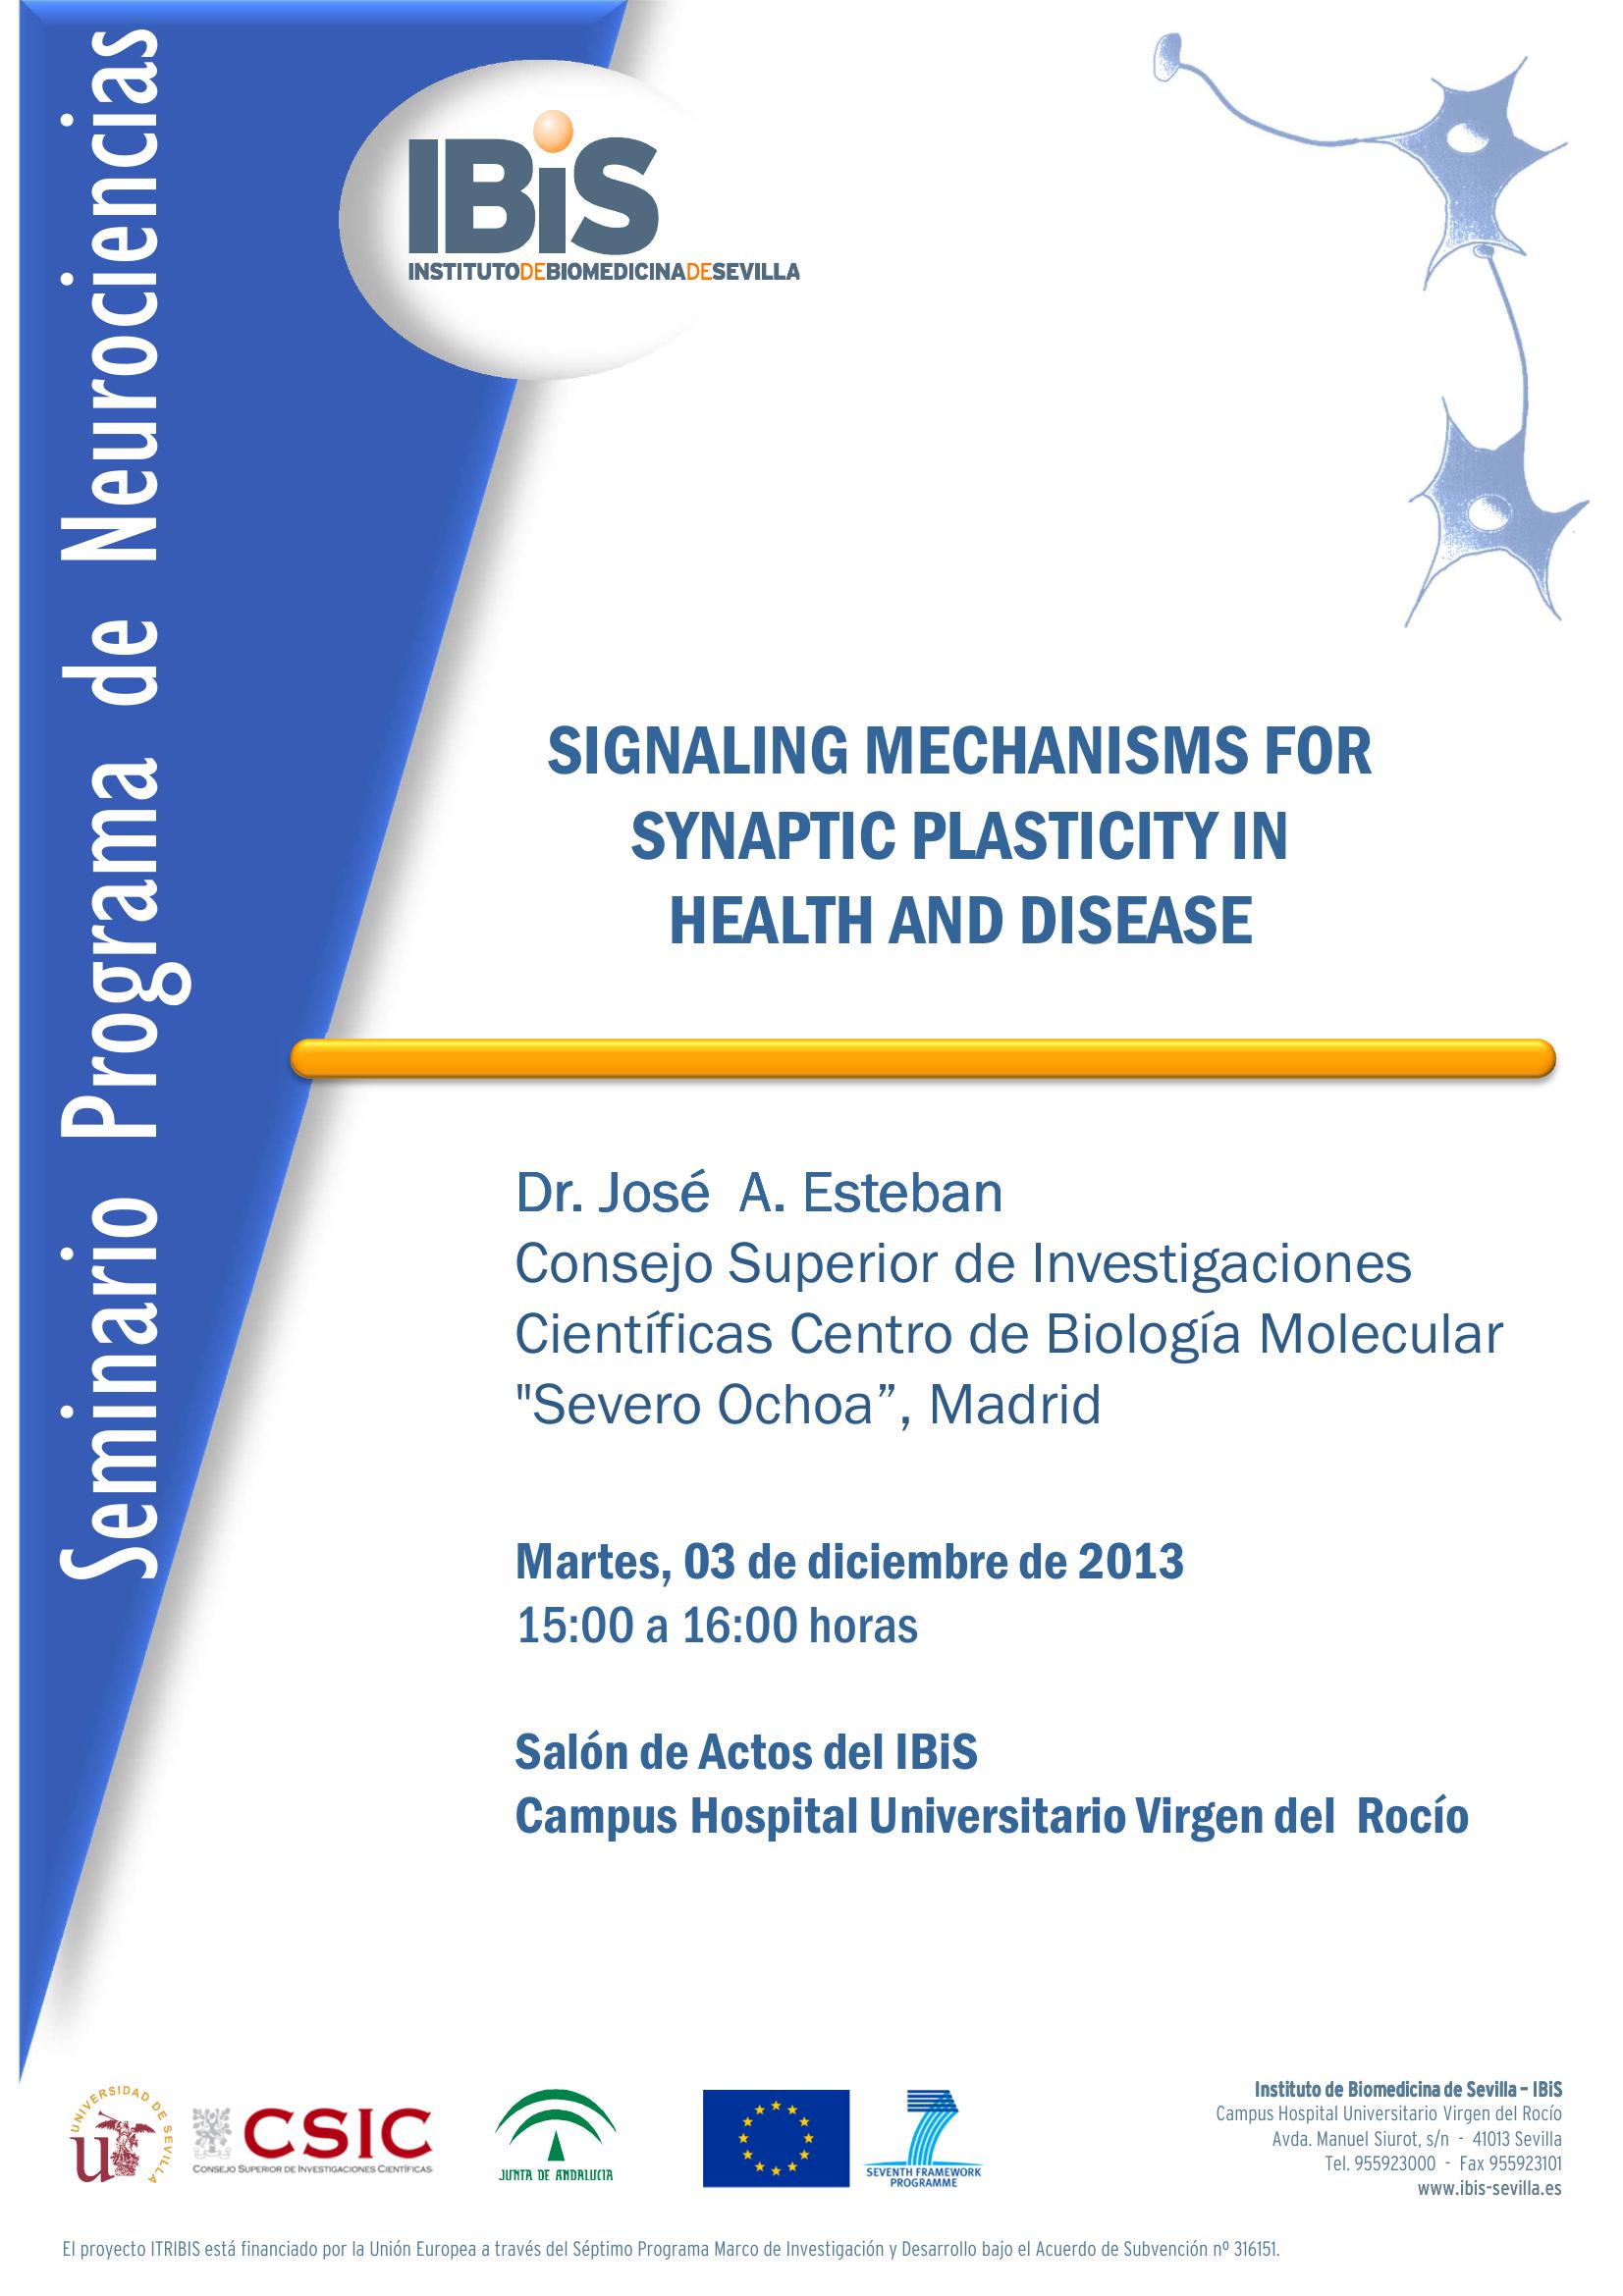 Poster: SIGNALING MECHANISMS FOR SYNAPTIC PLASTICITY IN HEALTH AND DISEASE